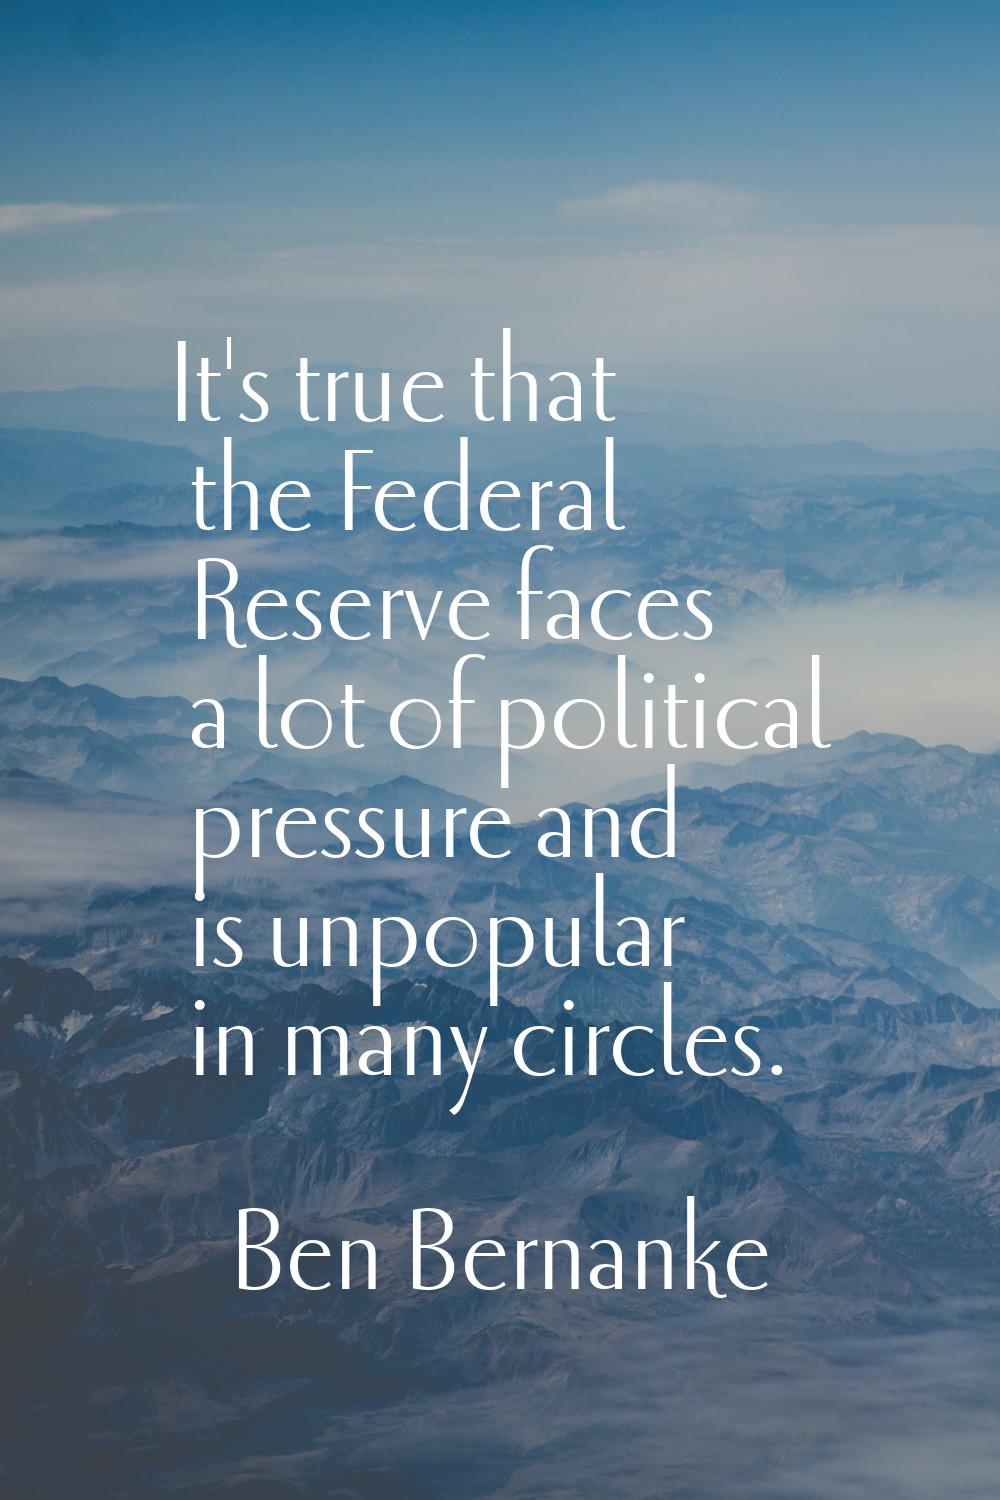 It's true that the Federal Reserve faces a lot of political pressure and is unpopular in many circl